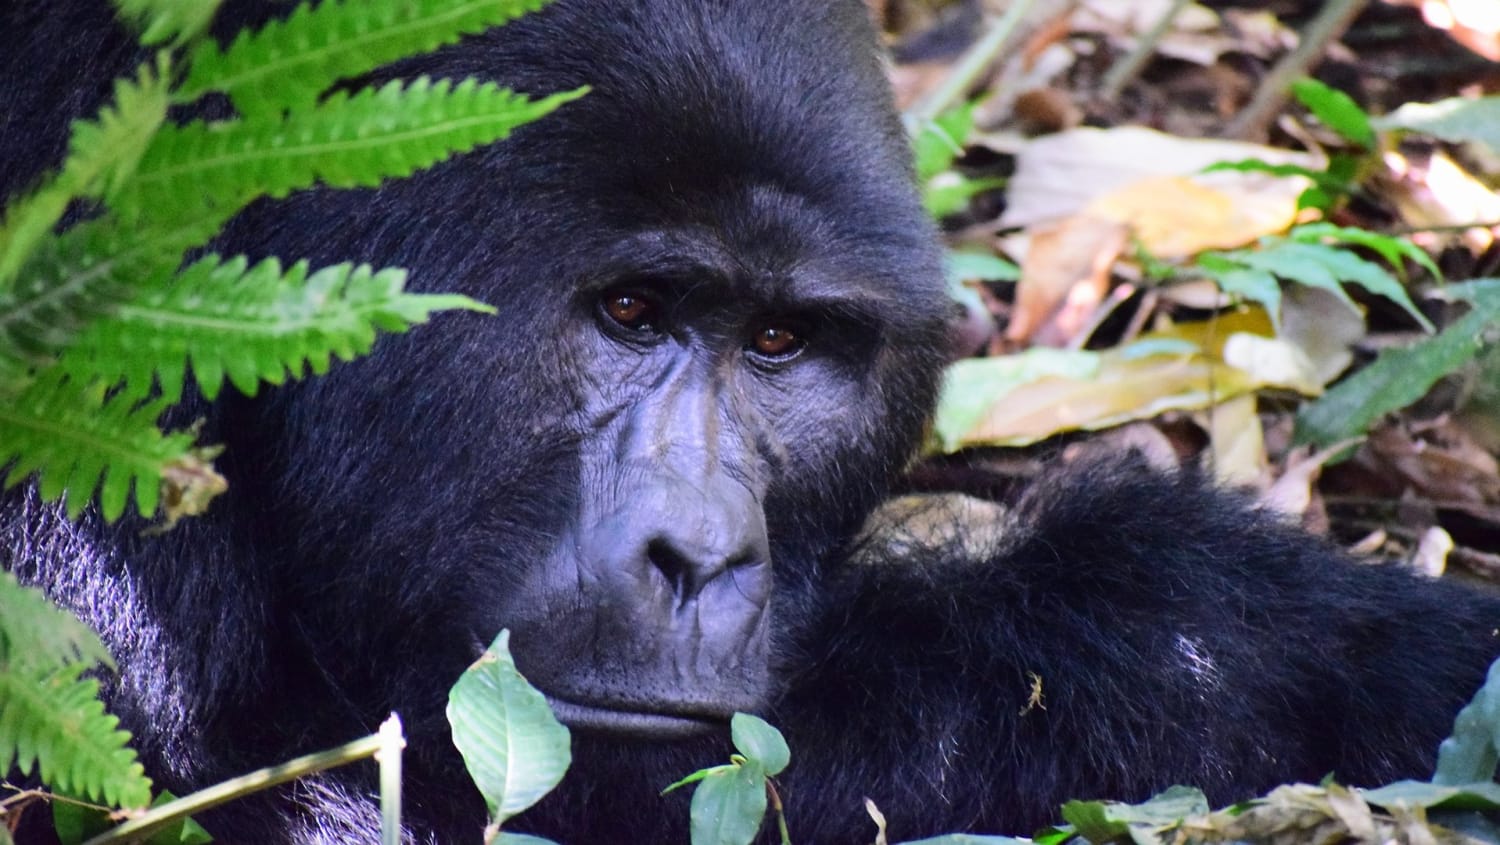 Interesting facts about mountain gorillas in Africa - Exploration of Africa